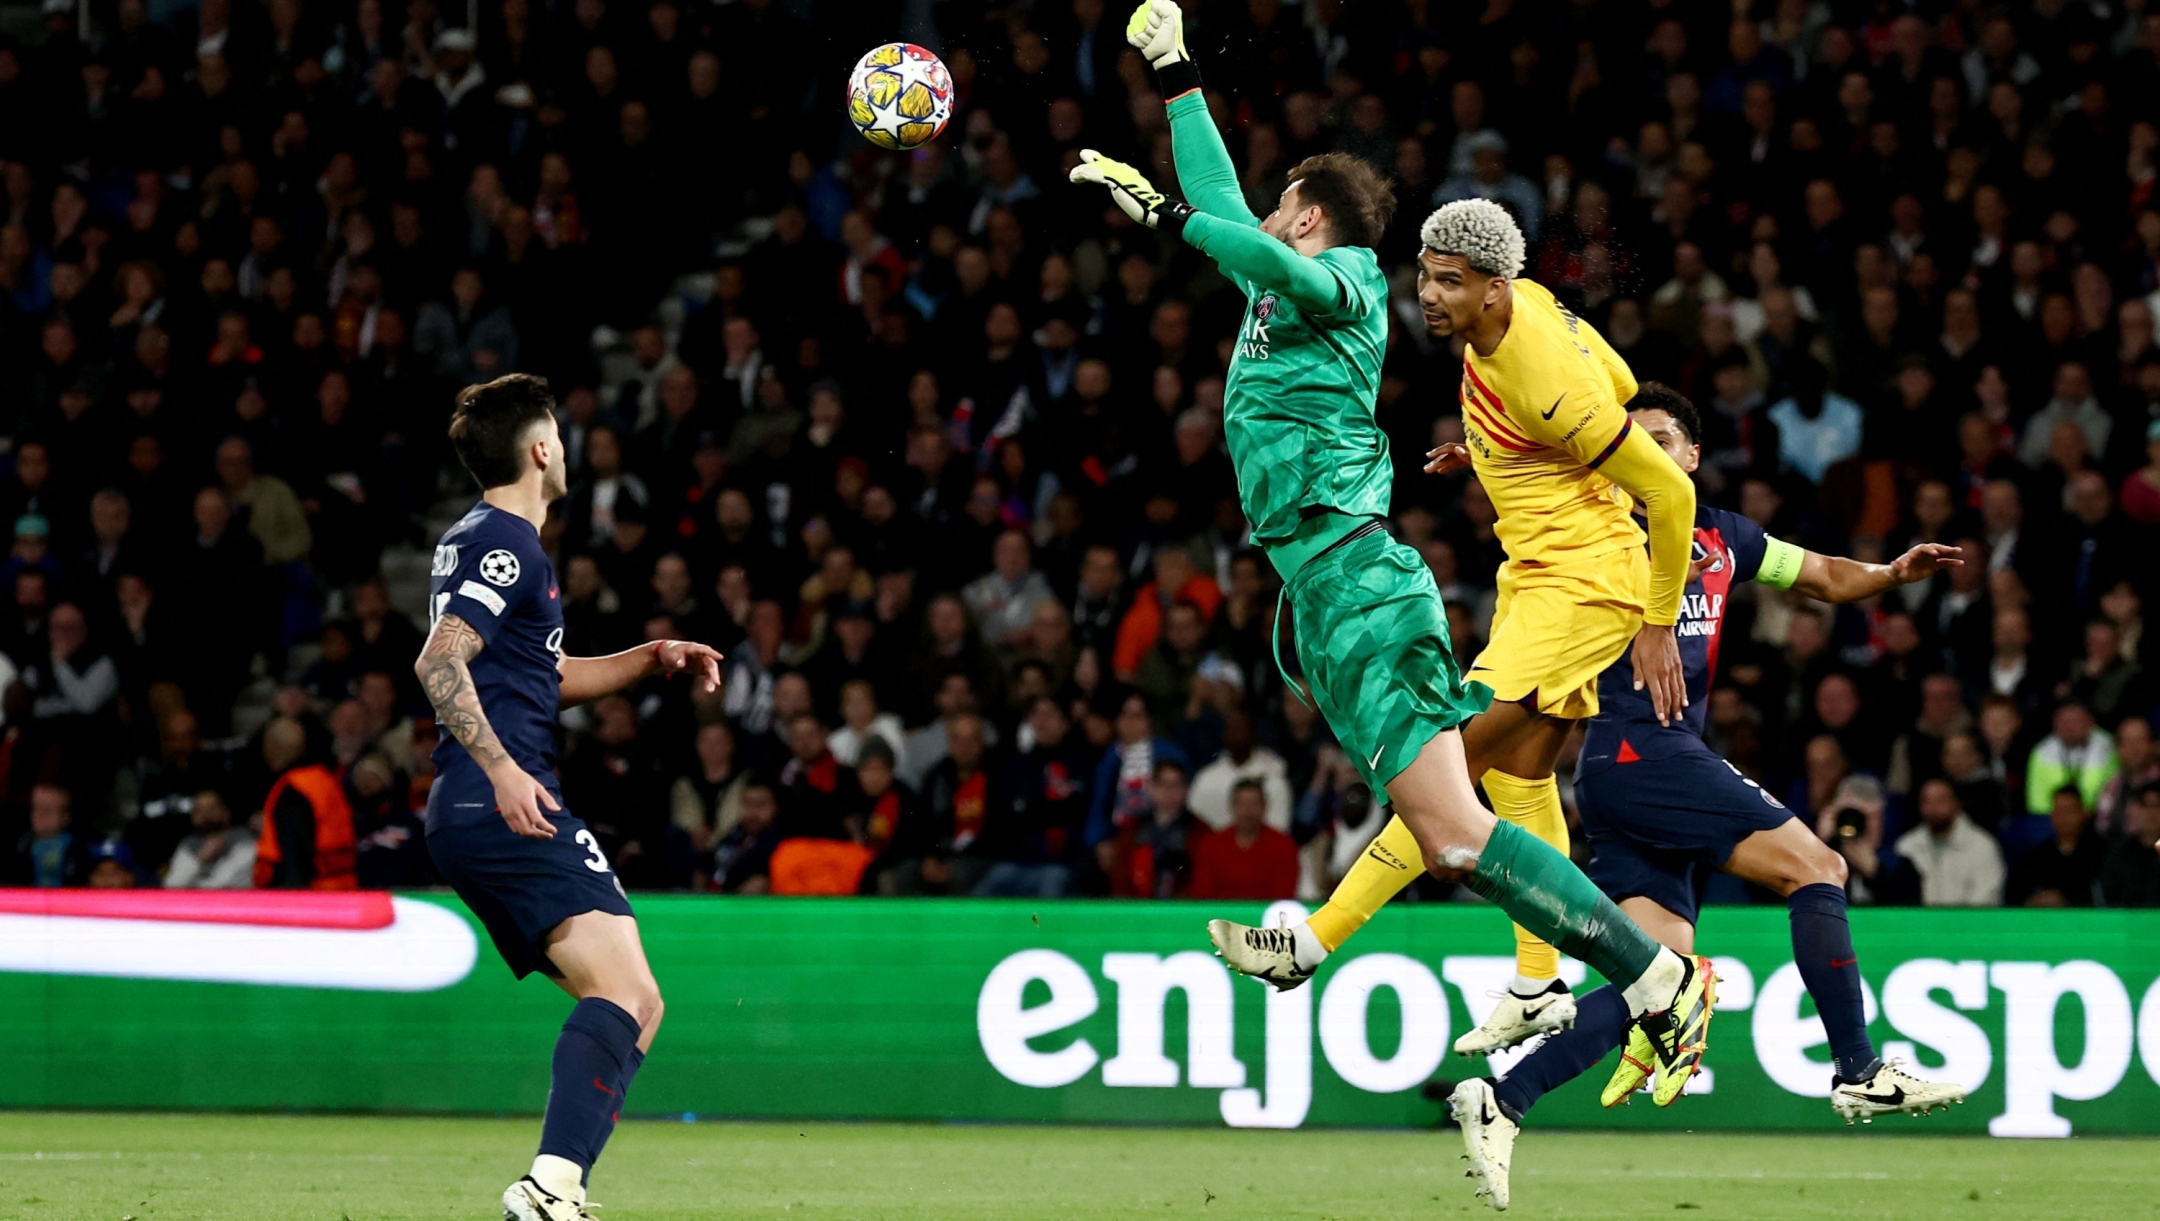 Paris Saint-Germain's Italian goalkeeper #99 Gianluigi Donnarumma (C) leaps in the air to punch the ball ahead of Barcelona's Uruguayan defender #04 Ronald Araujo (2R) during the UEFA Champions League quarter final first leg football match between Paris Saint-Germain (PSG) and FC Barcelona at the Parc des Princes stadium in Paris on April 10, 2024. (Photo by Anne-Christine POUJOULAT / AFP)